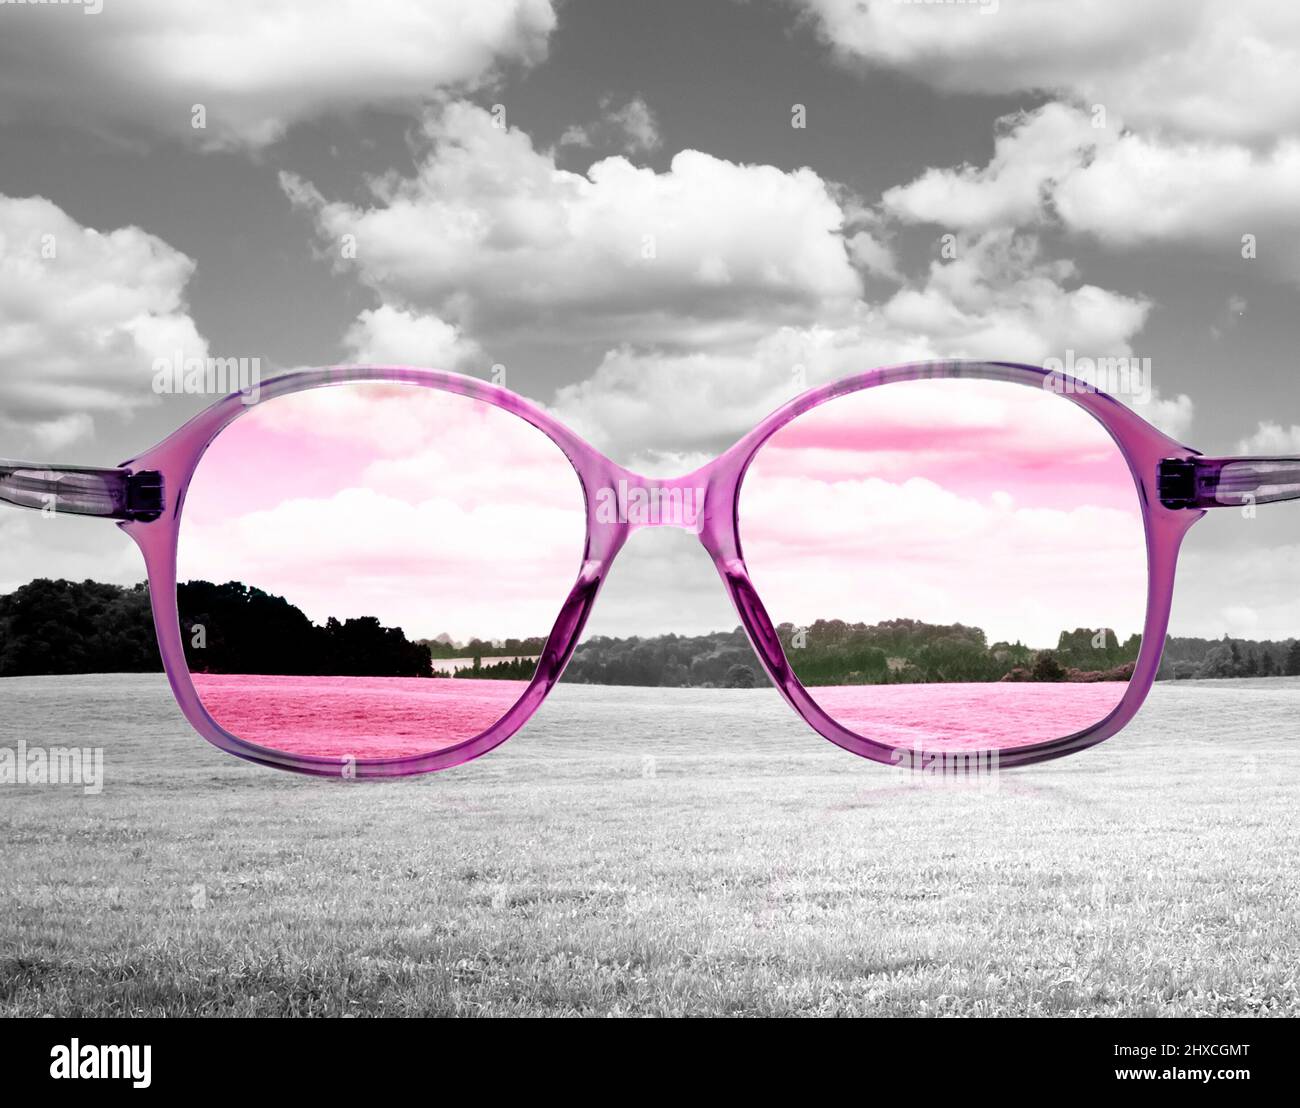 Seeing the world through rose colored glasses Stock Photo - Alamy